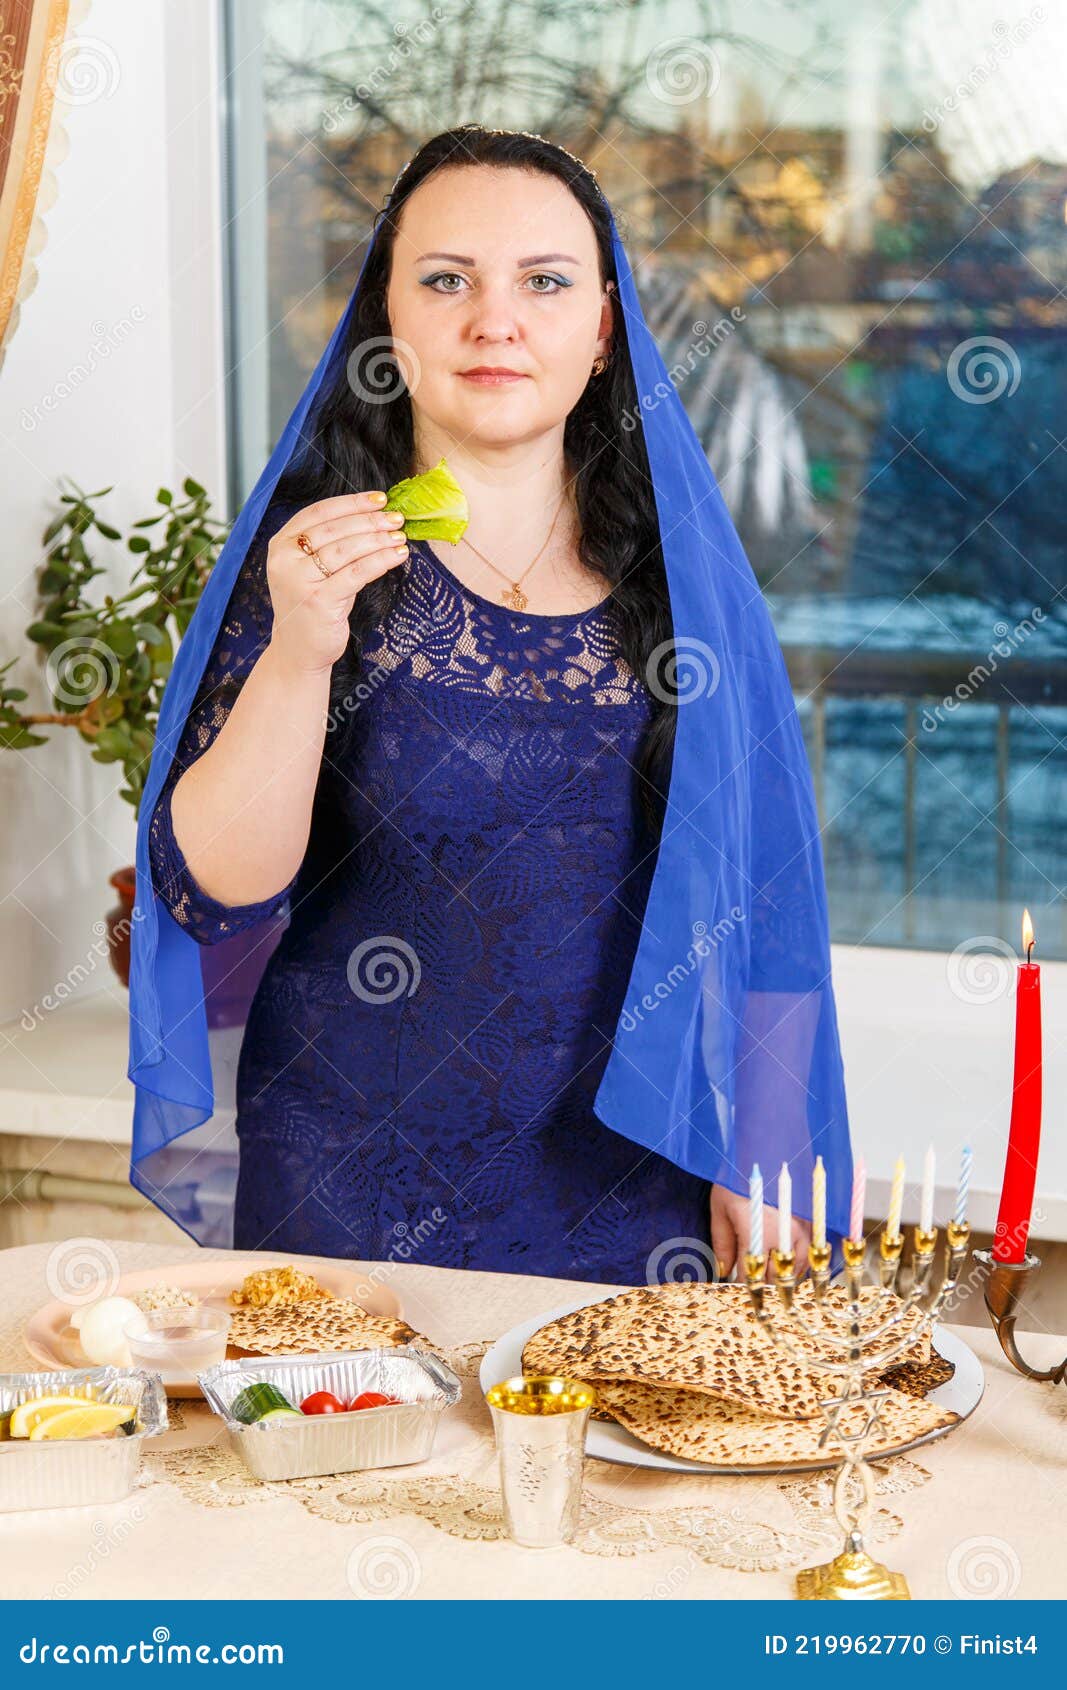 a jewish woman with her head covered in a blue cape at the passover seder table is eating moror hazeret matzah.